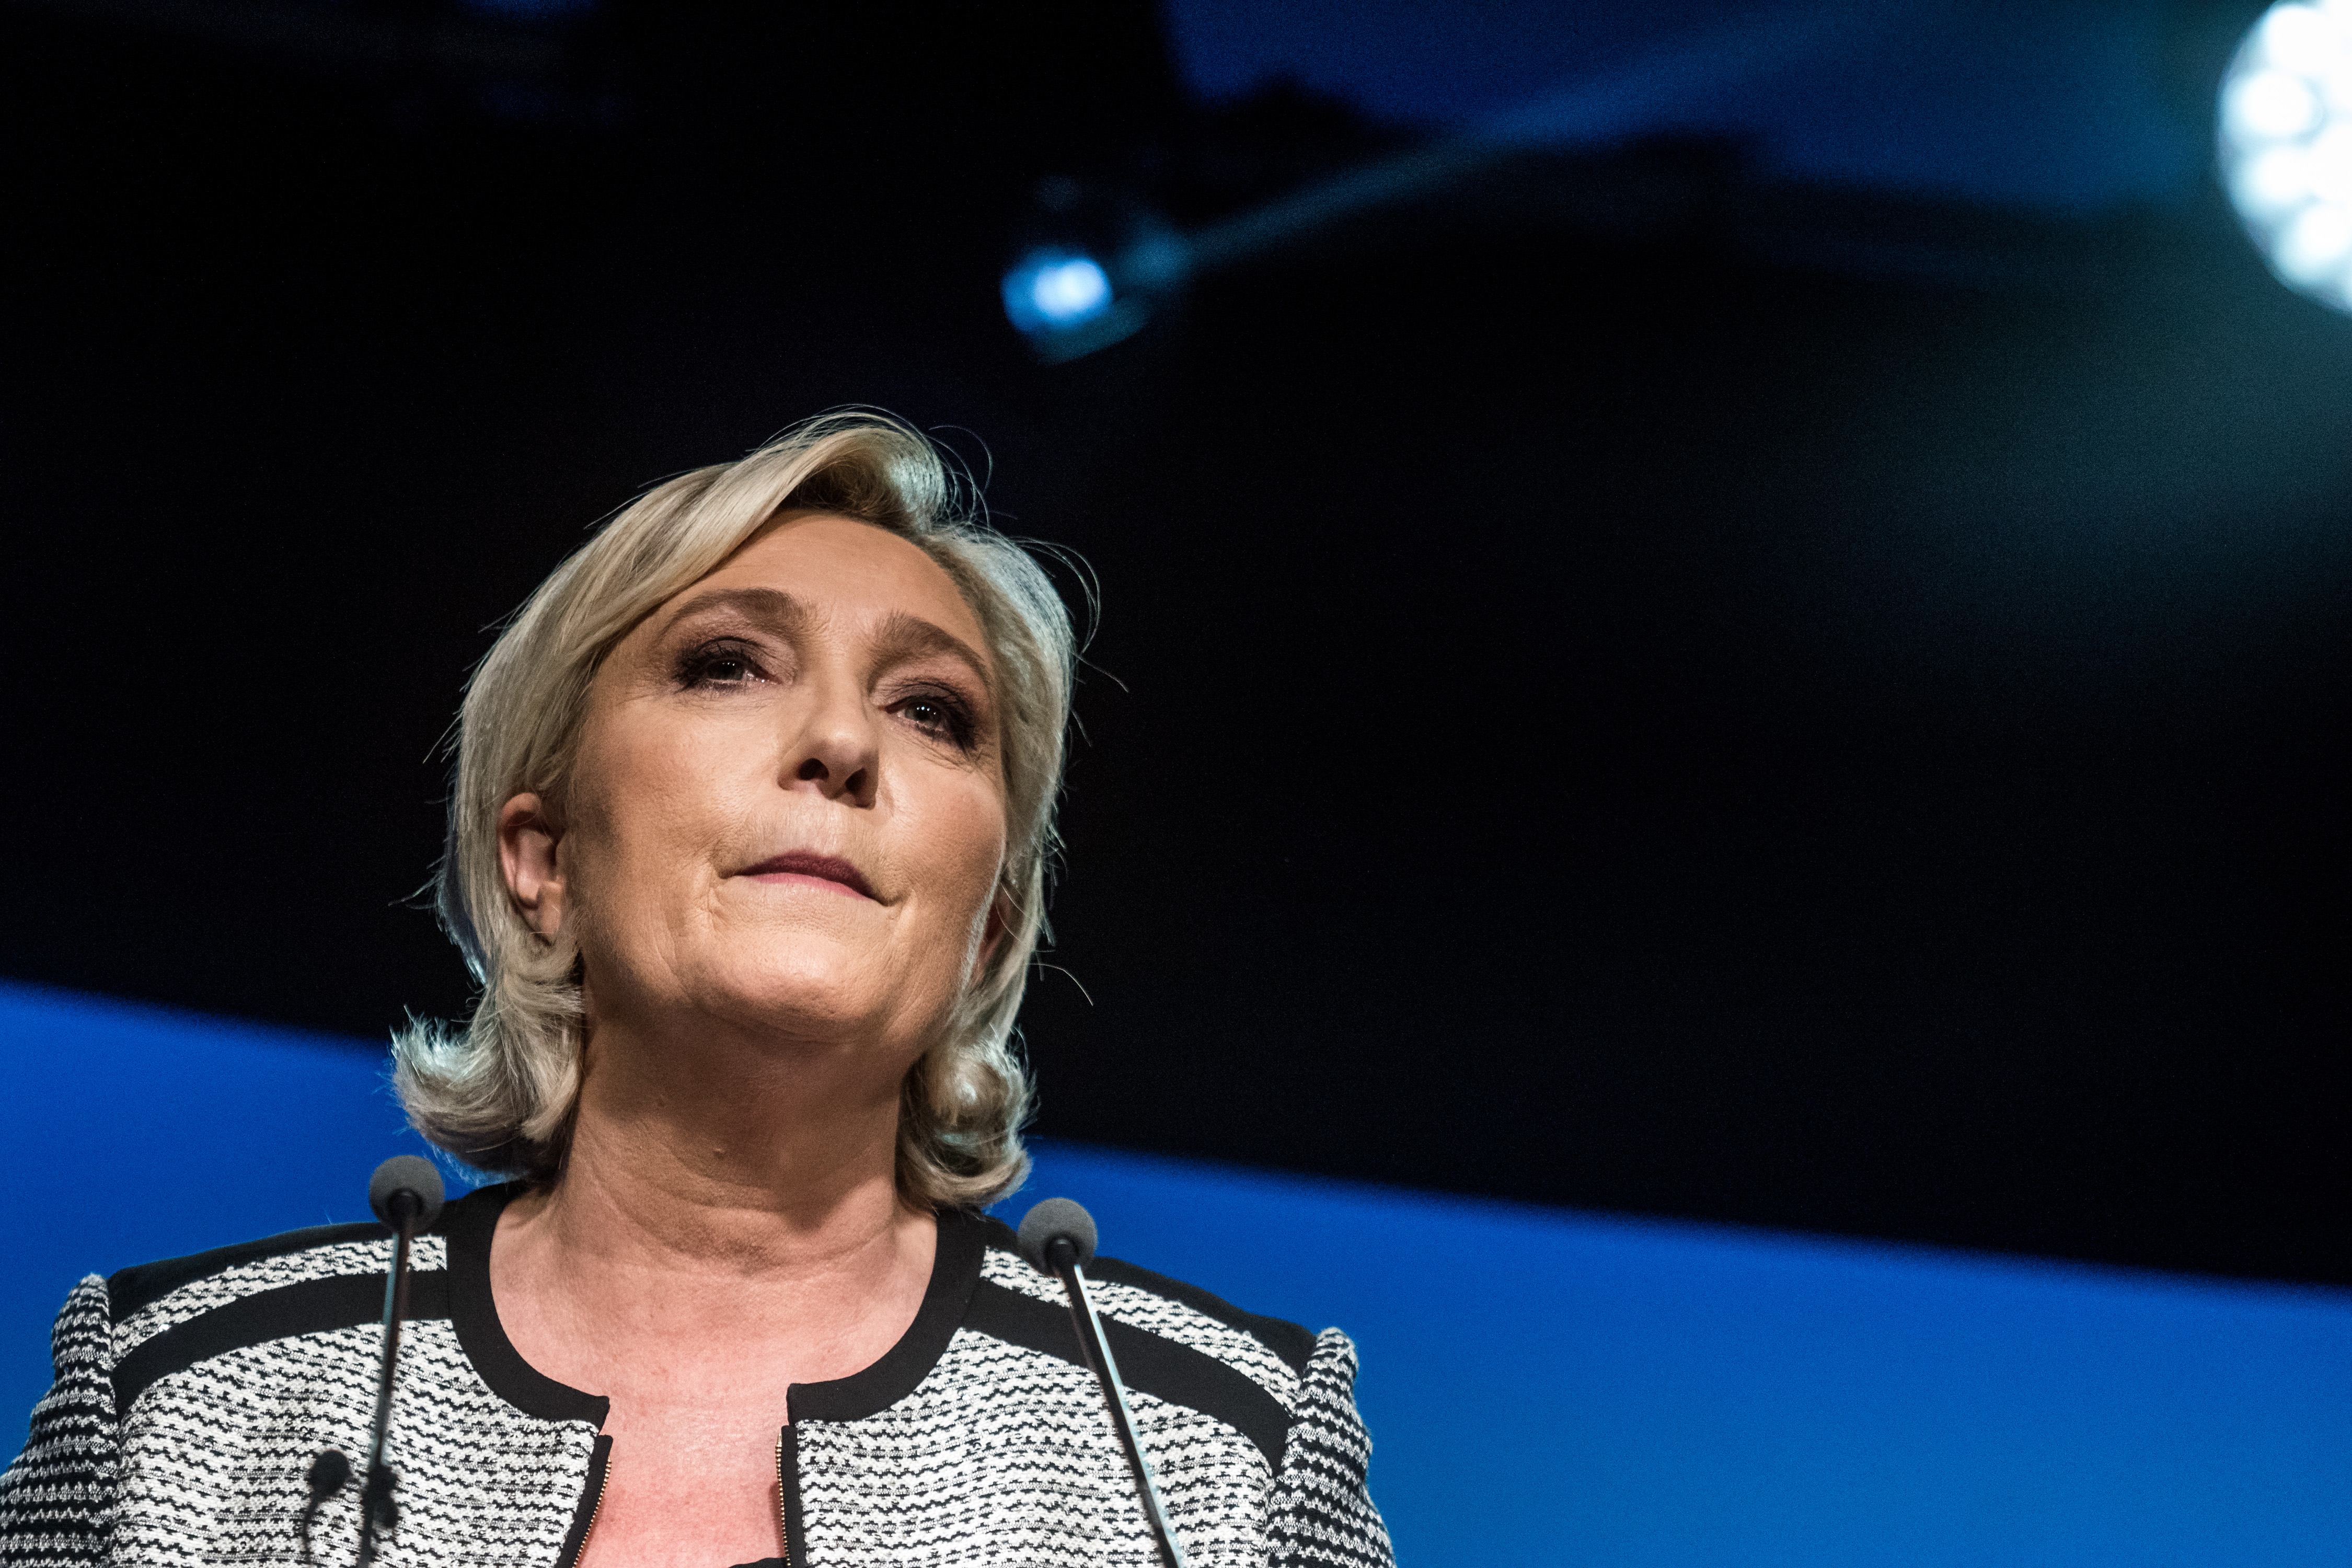 Congress Of Front National - Marine Le Pen In Lyon